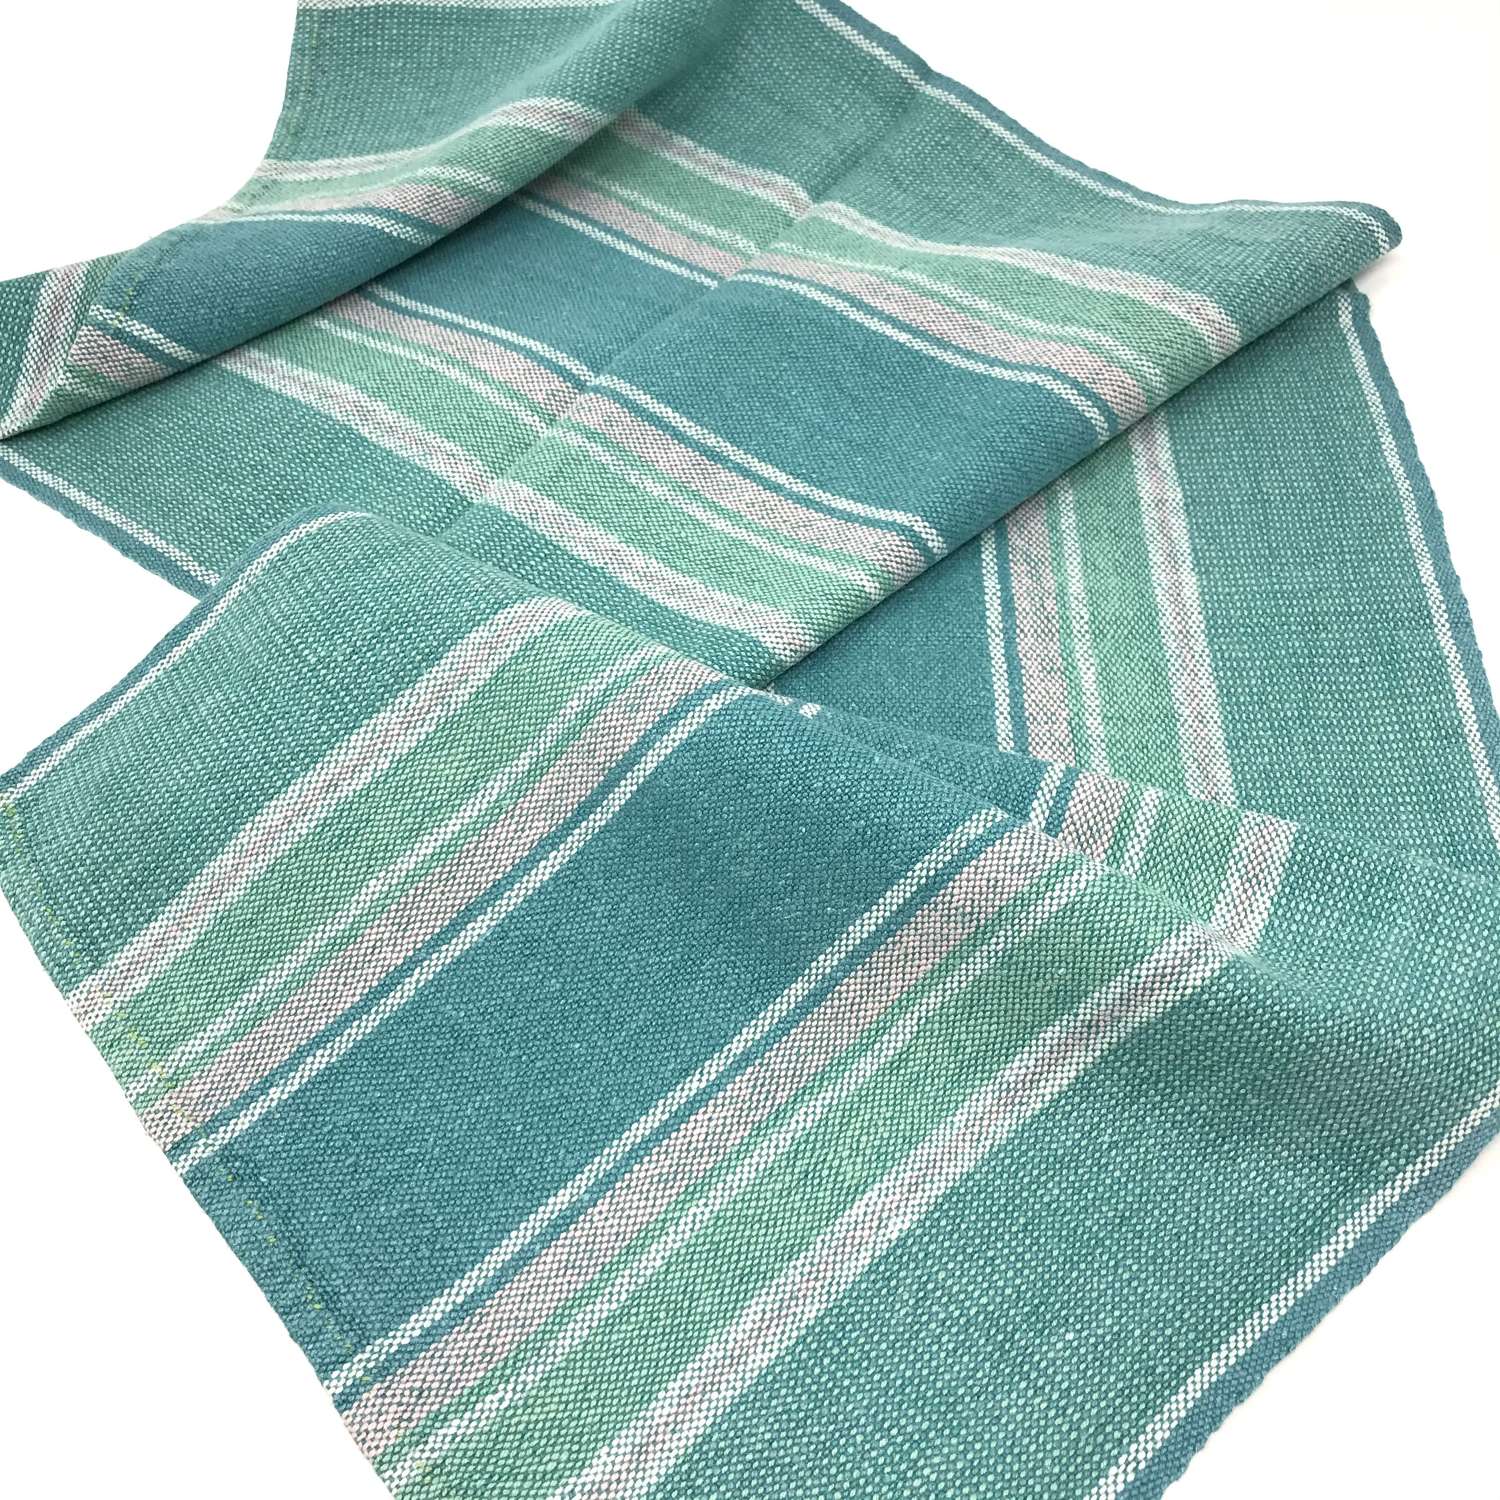 Vintage Swedish table runner, turquoise with pink and white stripes